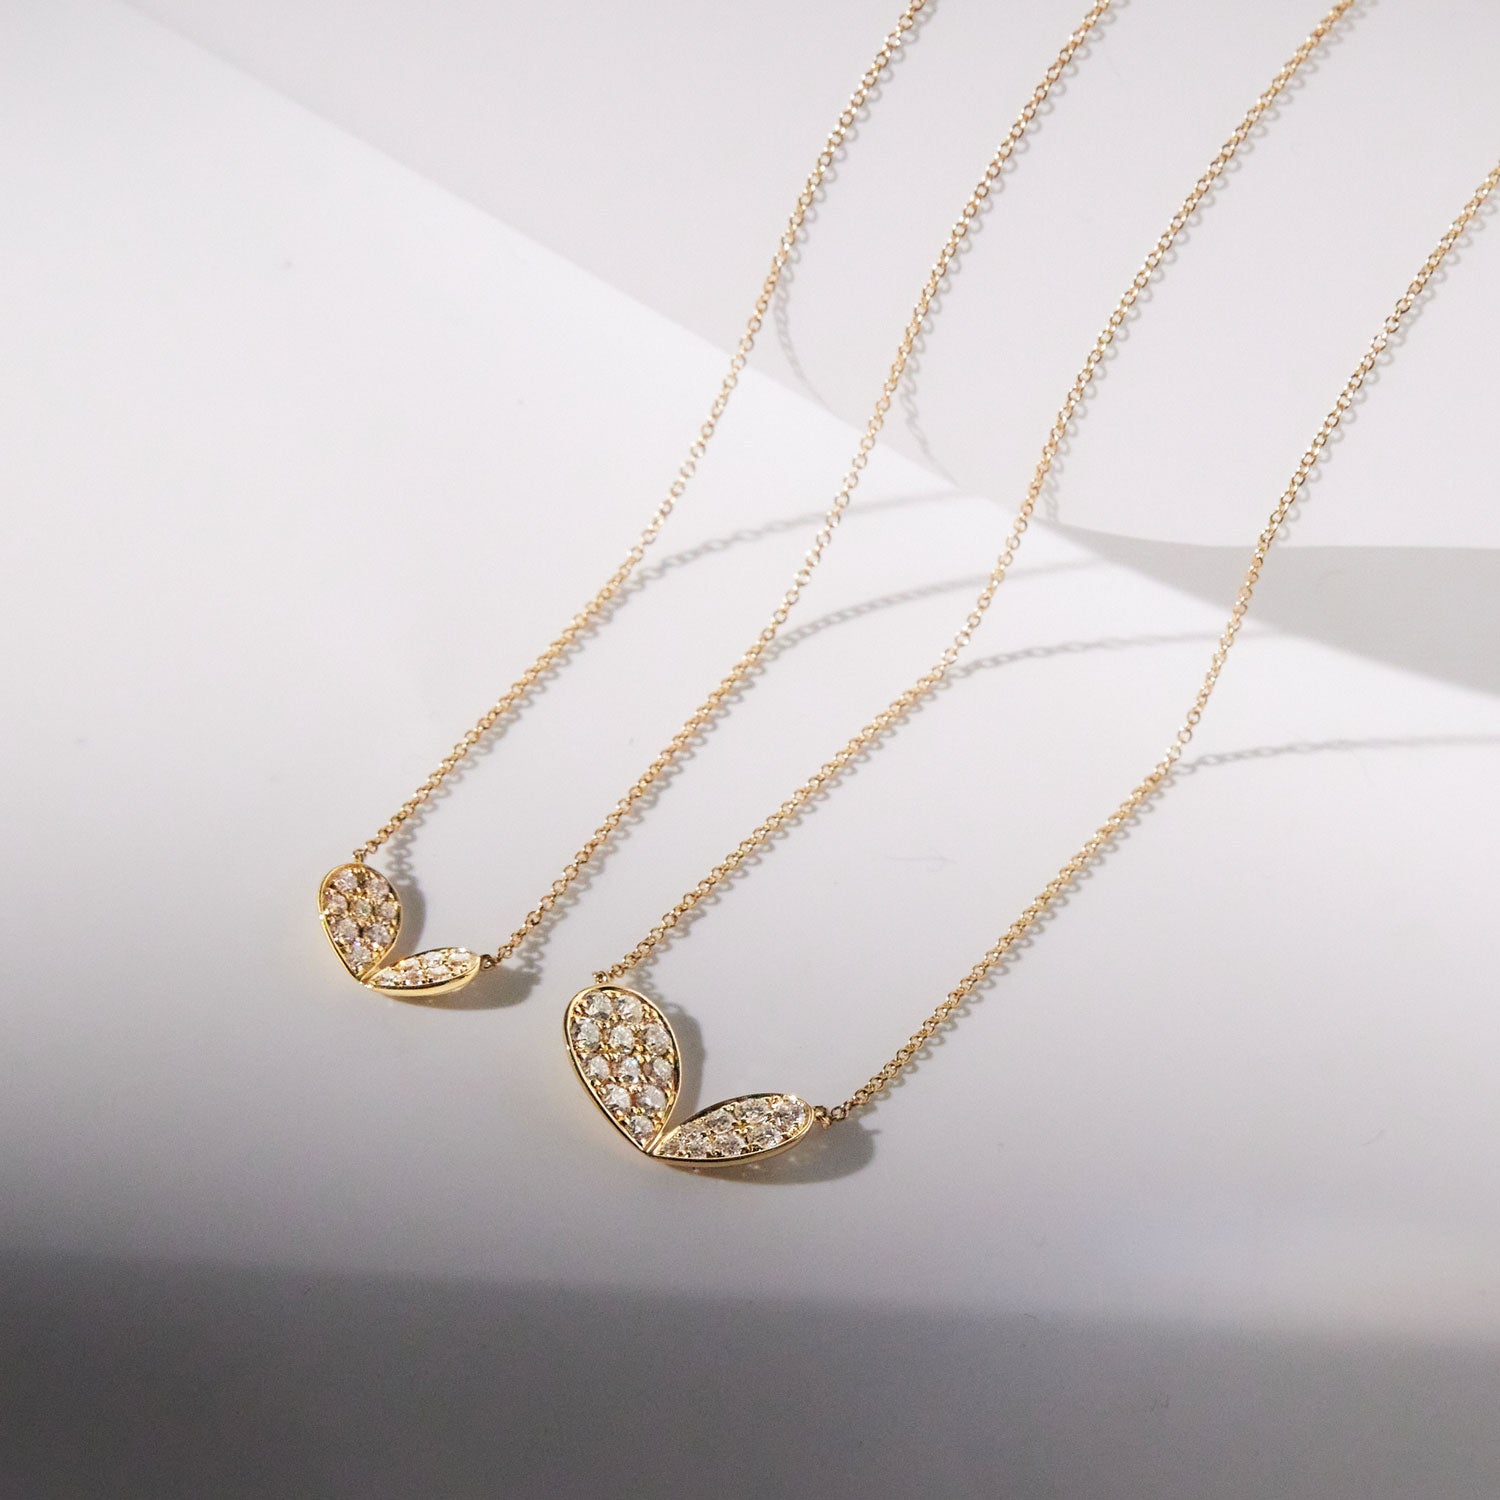 Whispers of Love Mini Necklace - Yellow Gold